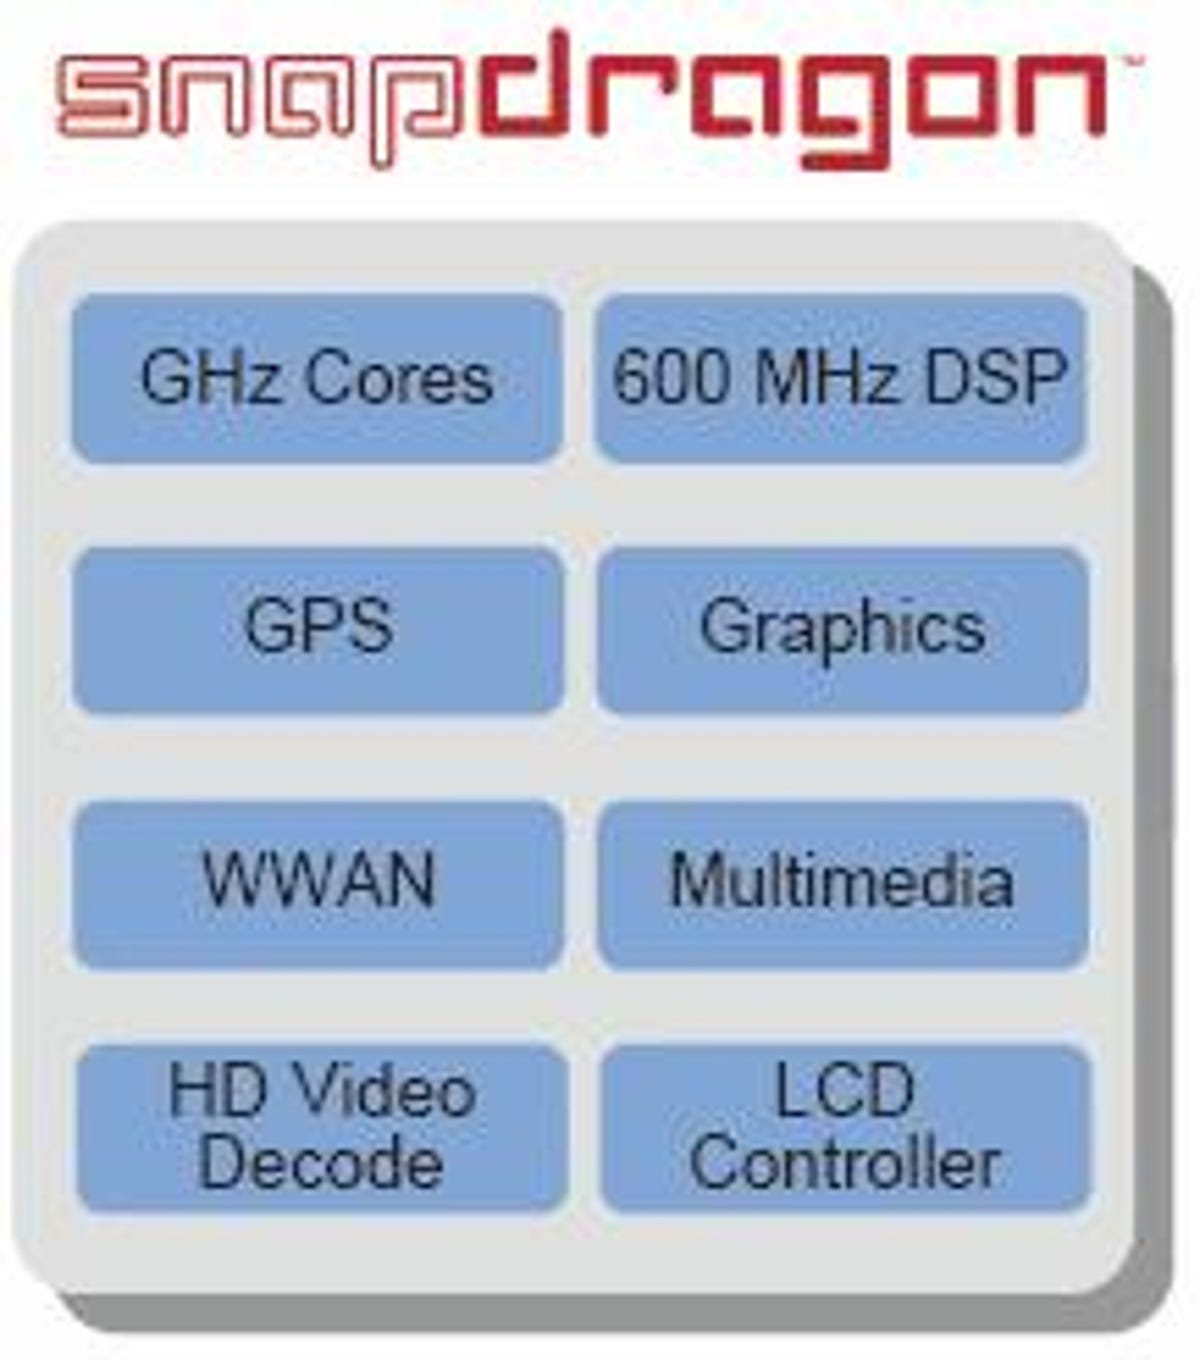 Qualcomm's Snapdragon is a highly integrated chip that is shipping now. Products are due in Q1 2009.